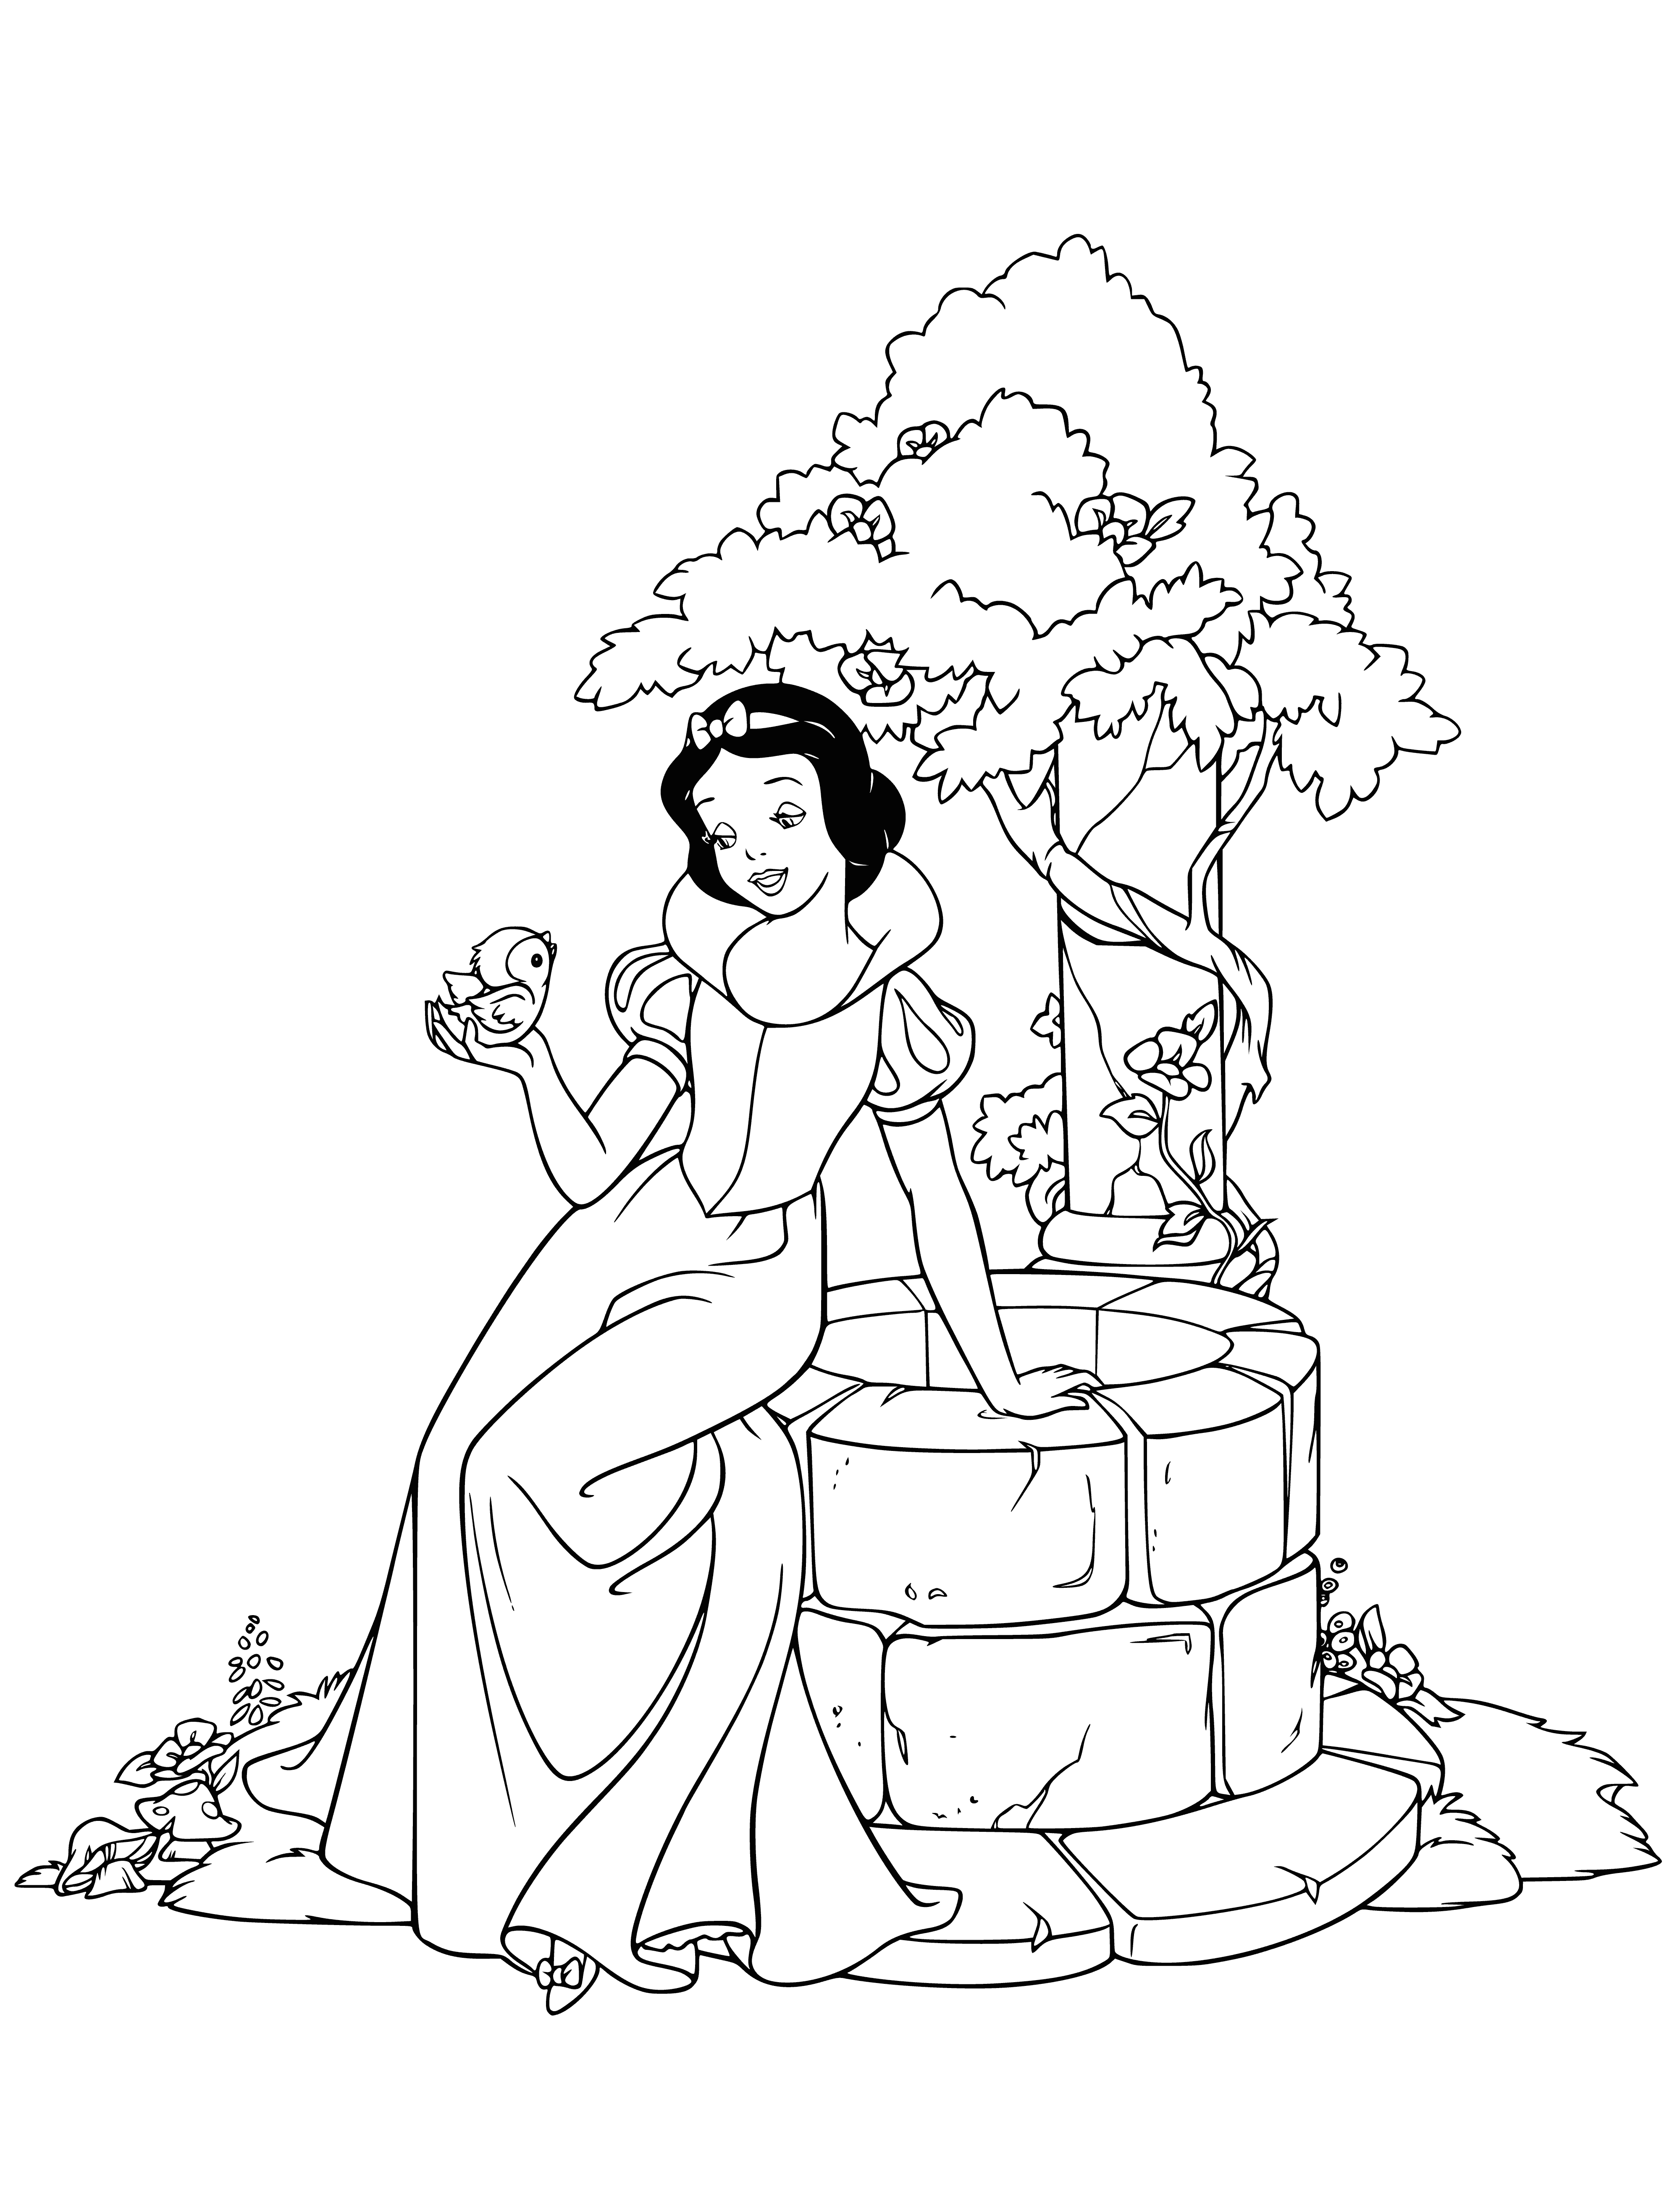 coloring page: Snow White stands at a well, surrounded by the seven dwarfs. They are all gazing down into the water.